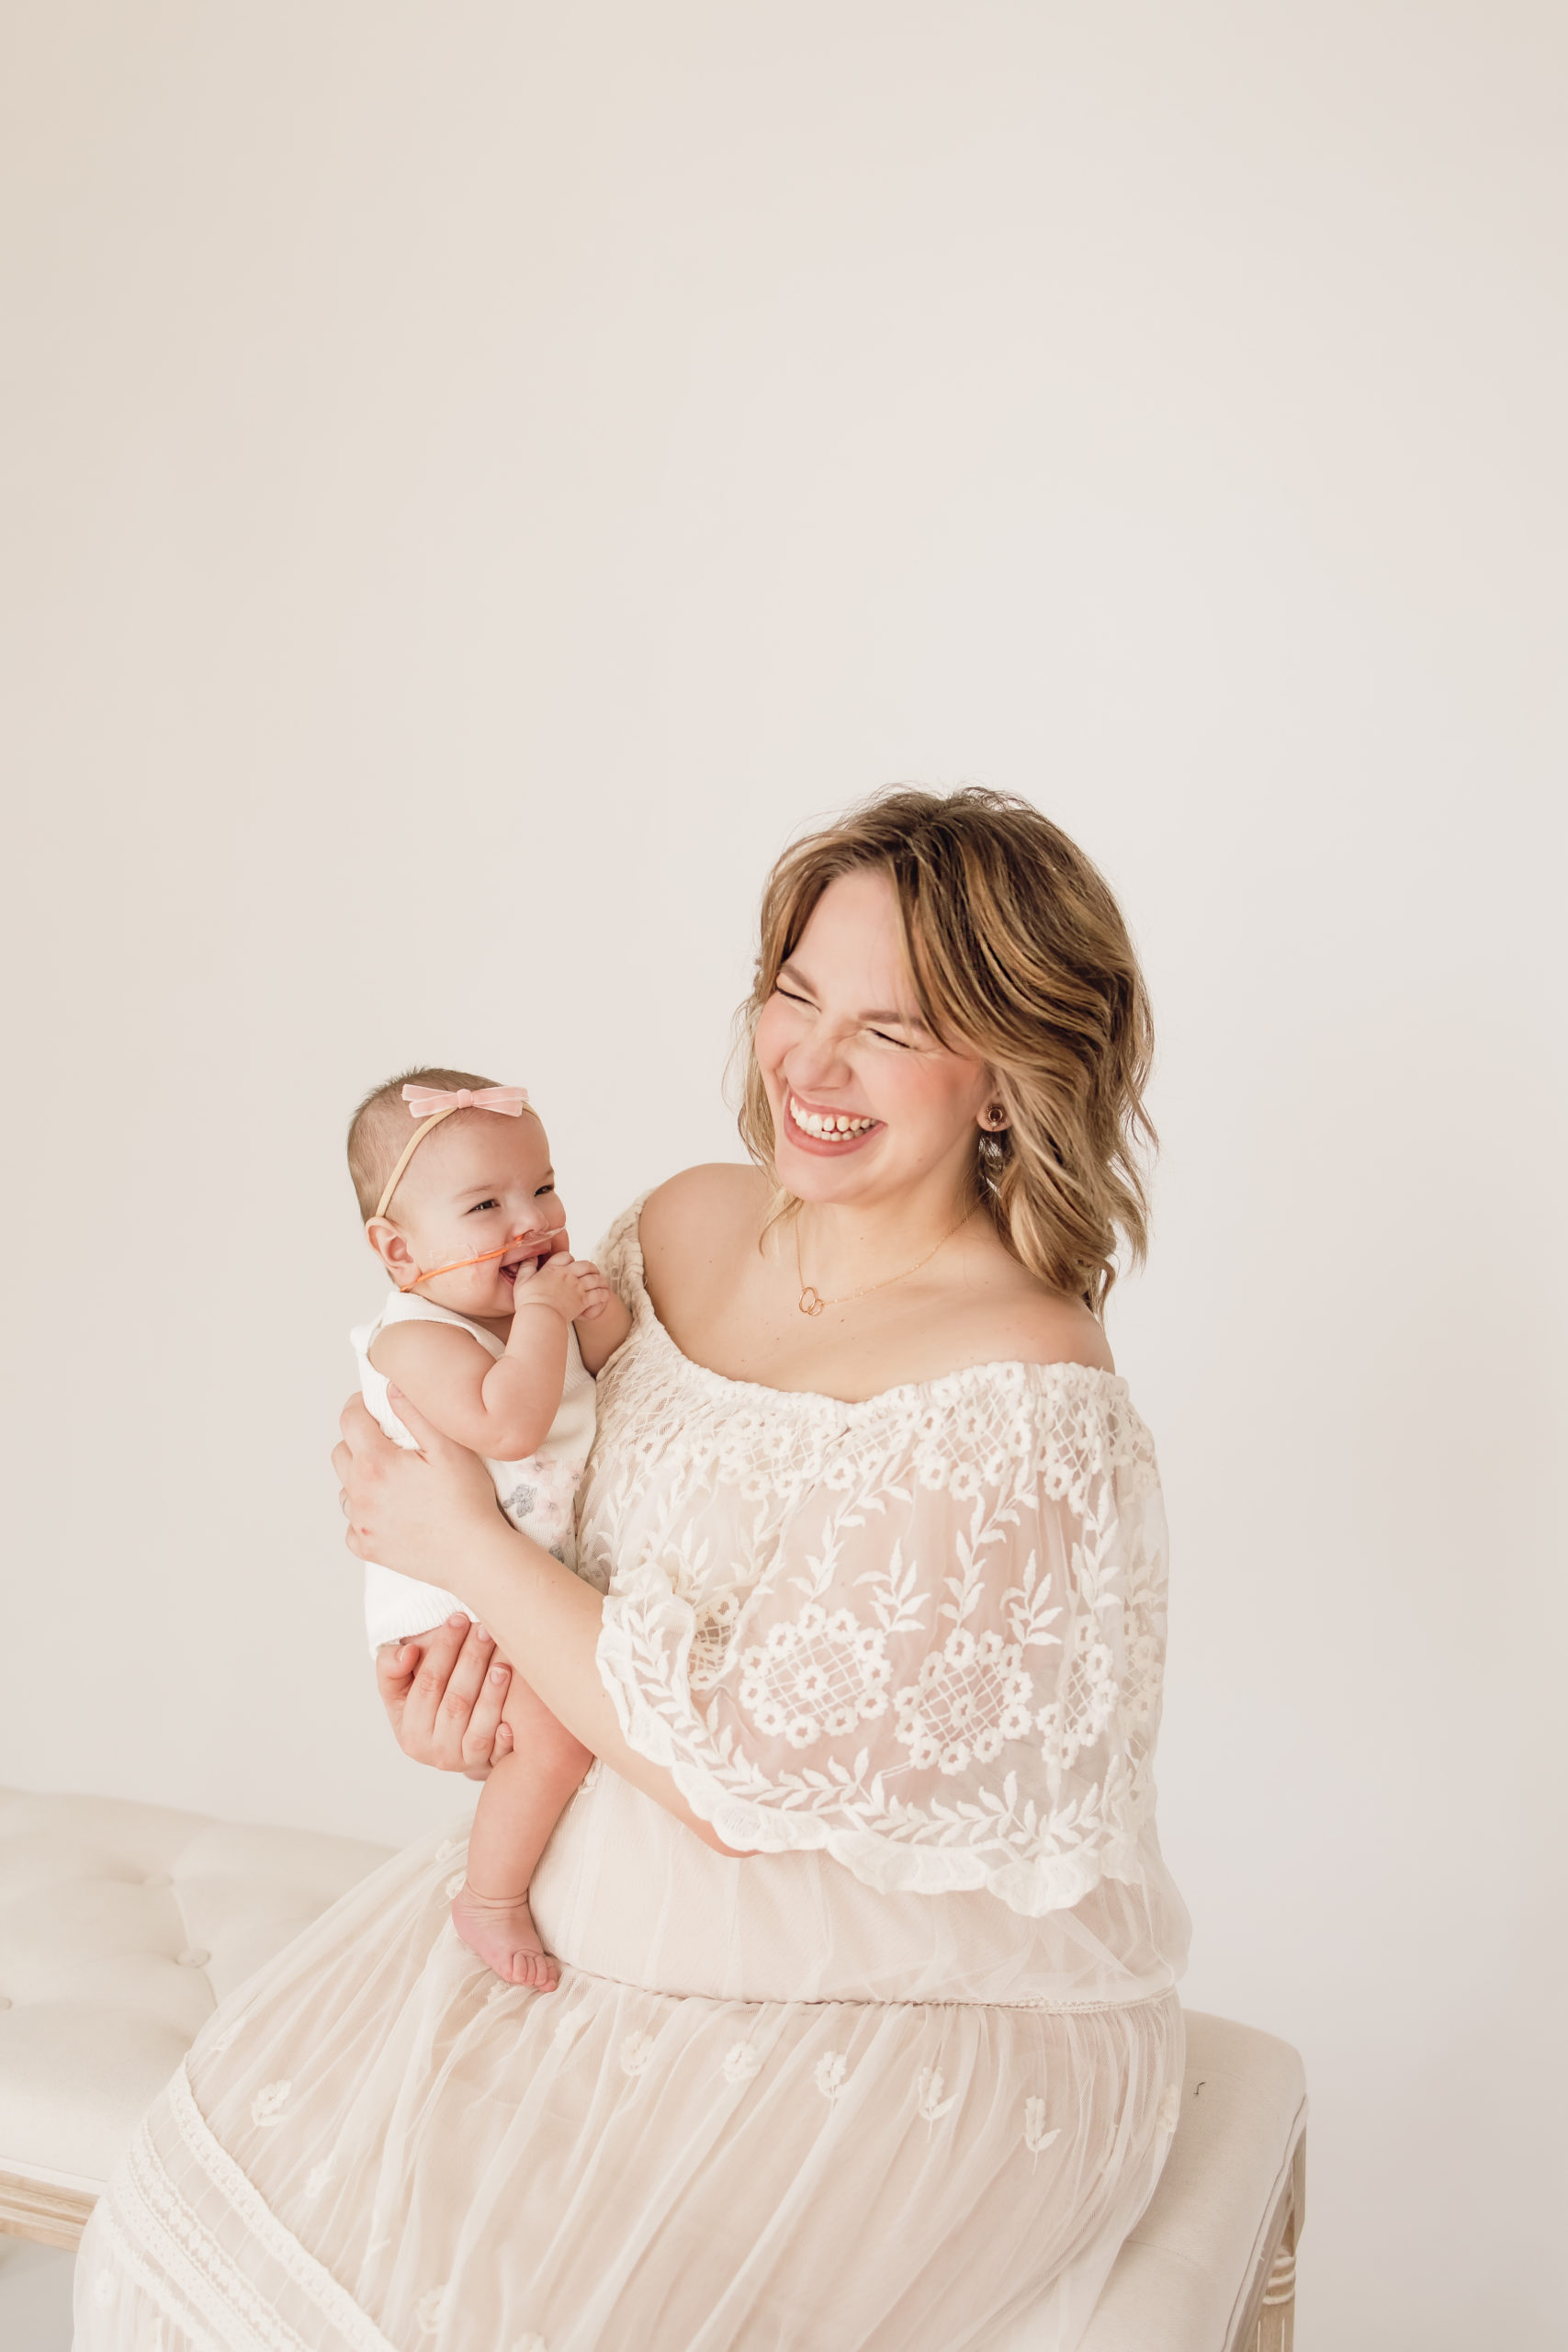 Mom smiling and holding her 6 month old baby during her milestone session taken by a Baby Photographer in Louisville